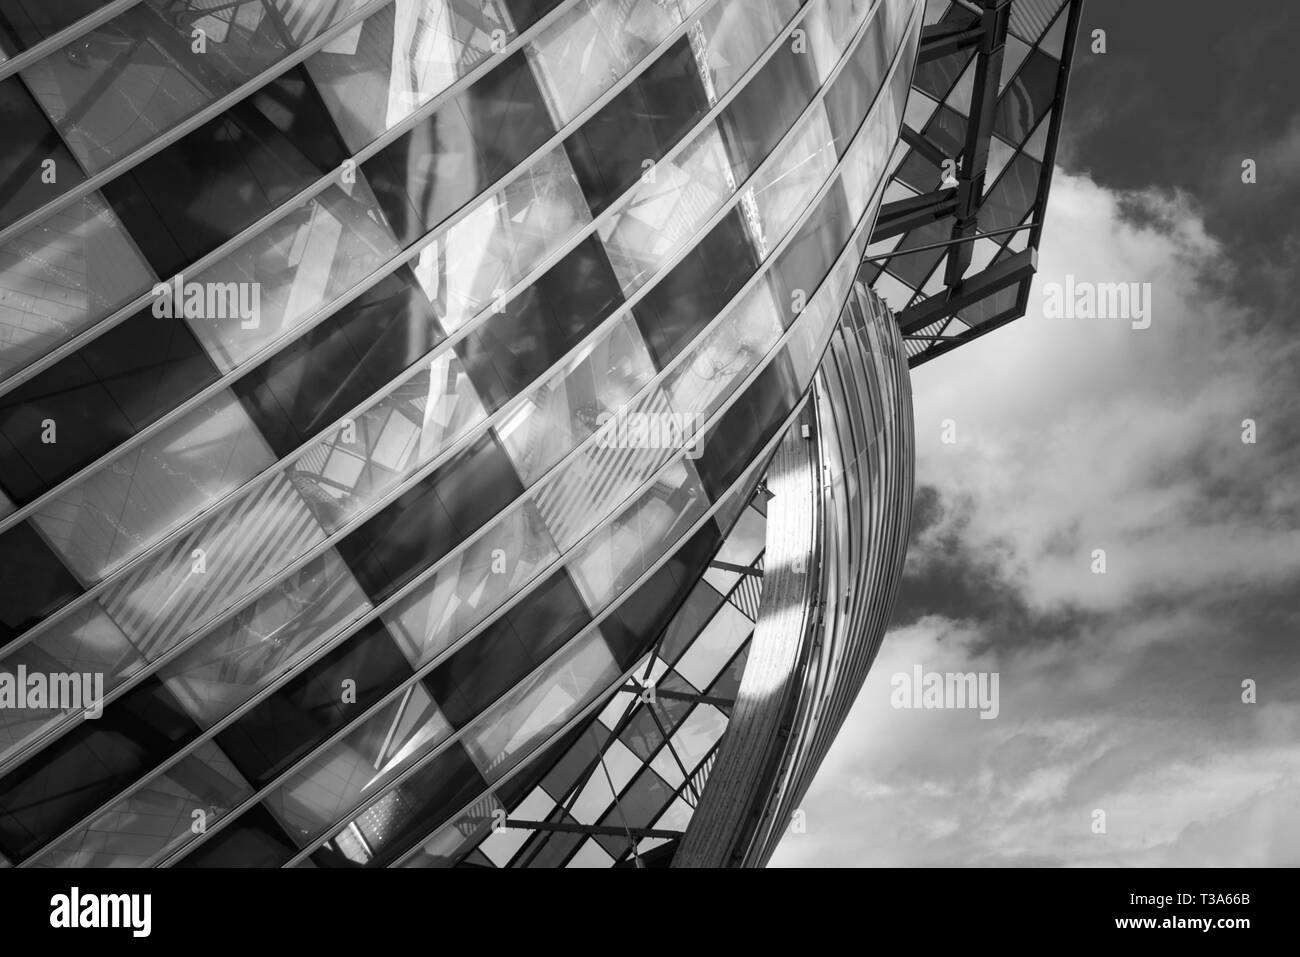 Louis vuitton store Black and White Stock Photos & Images - Alamy